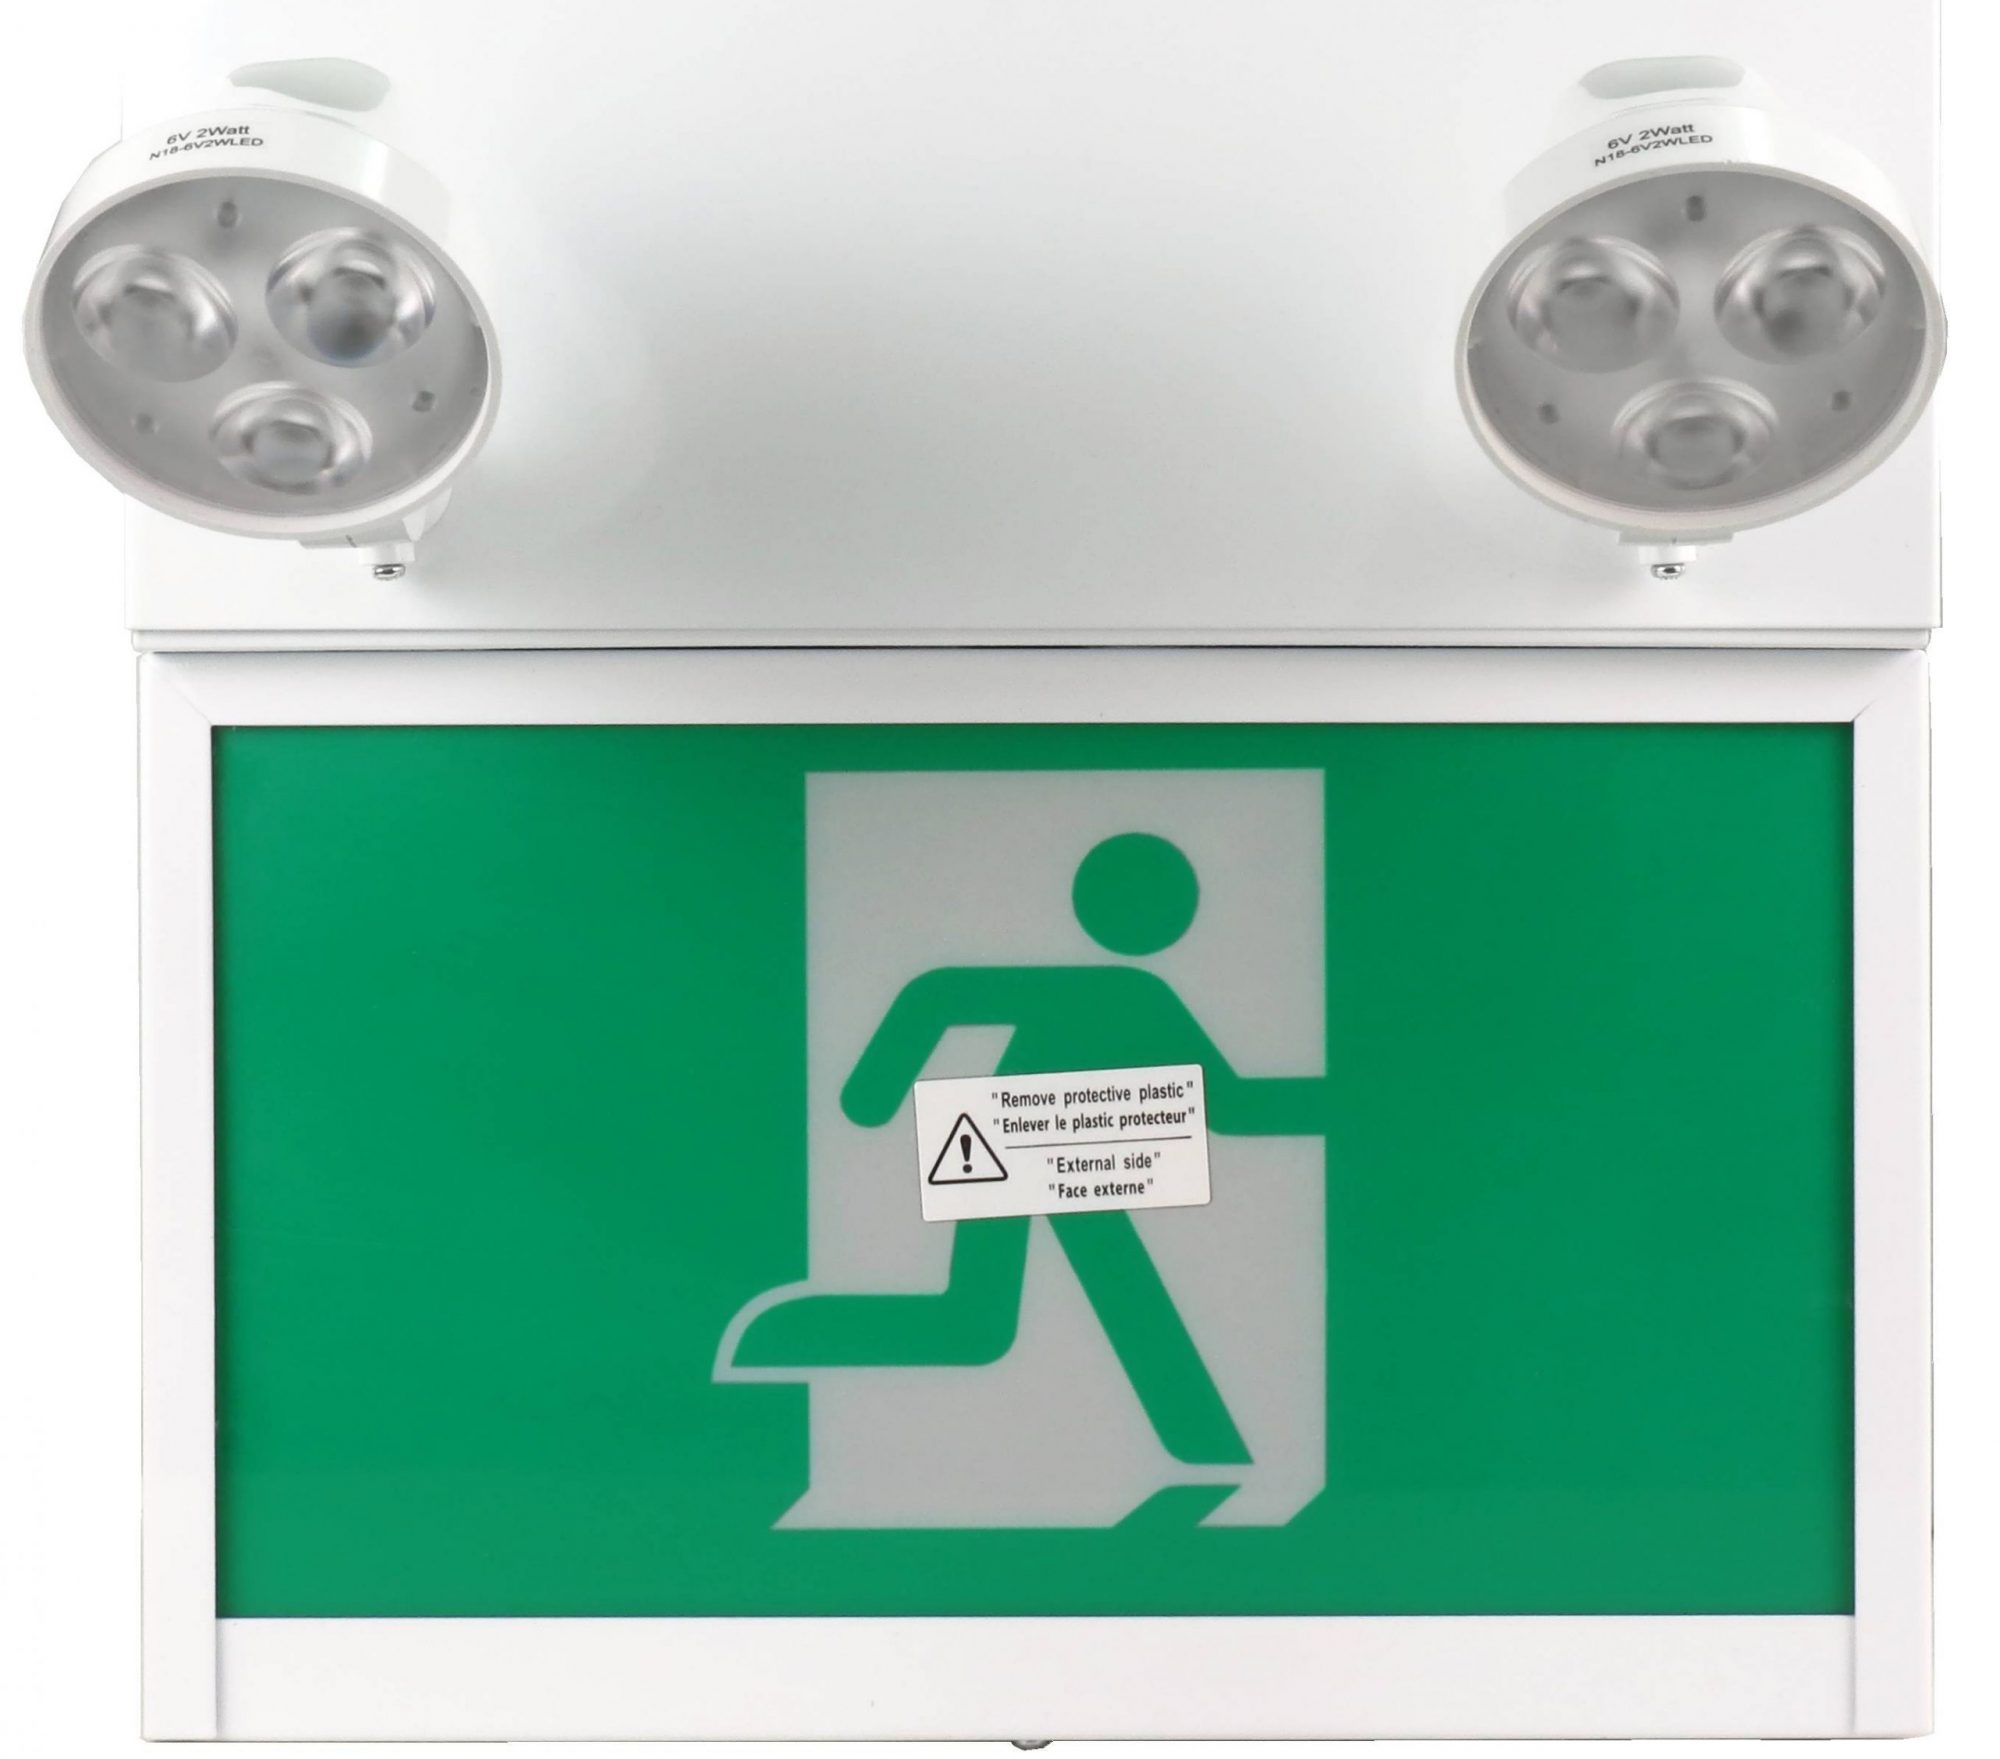 Emergency light for safety